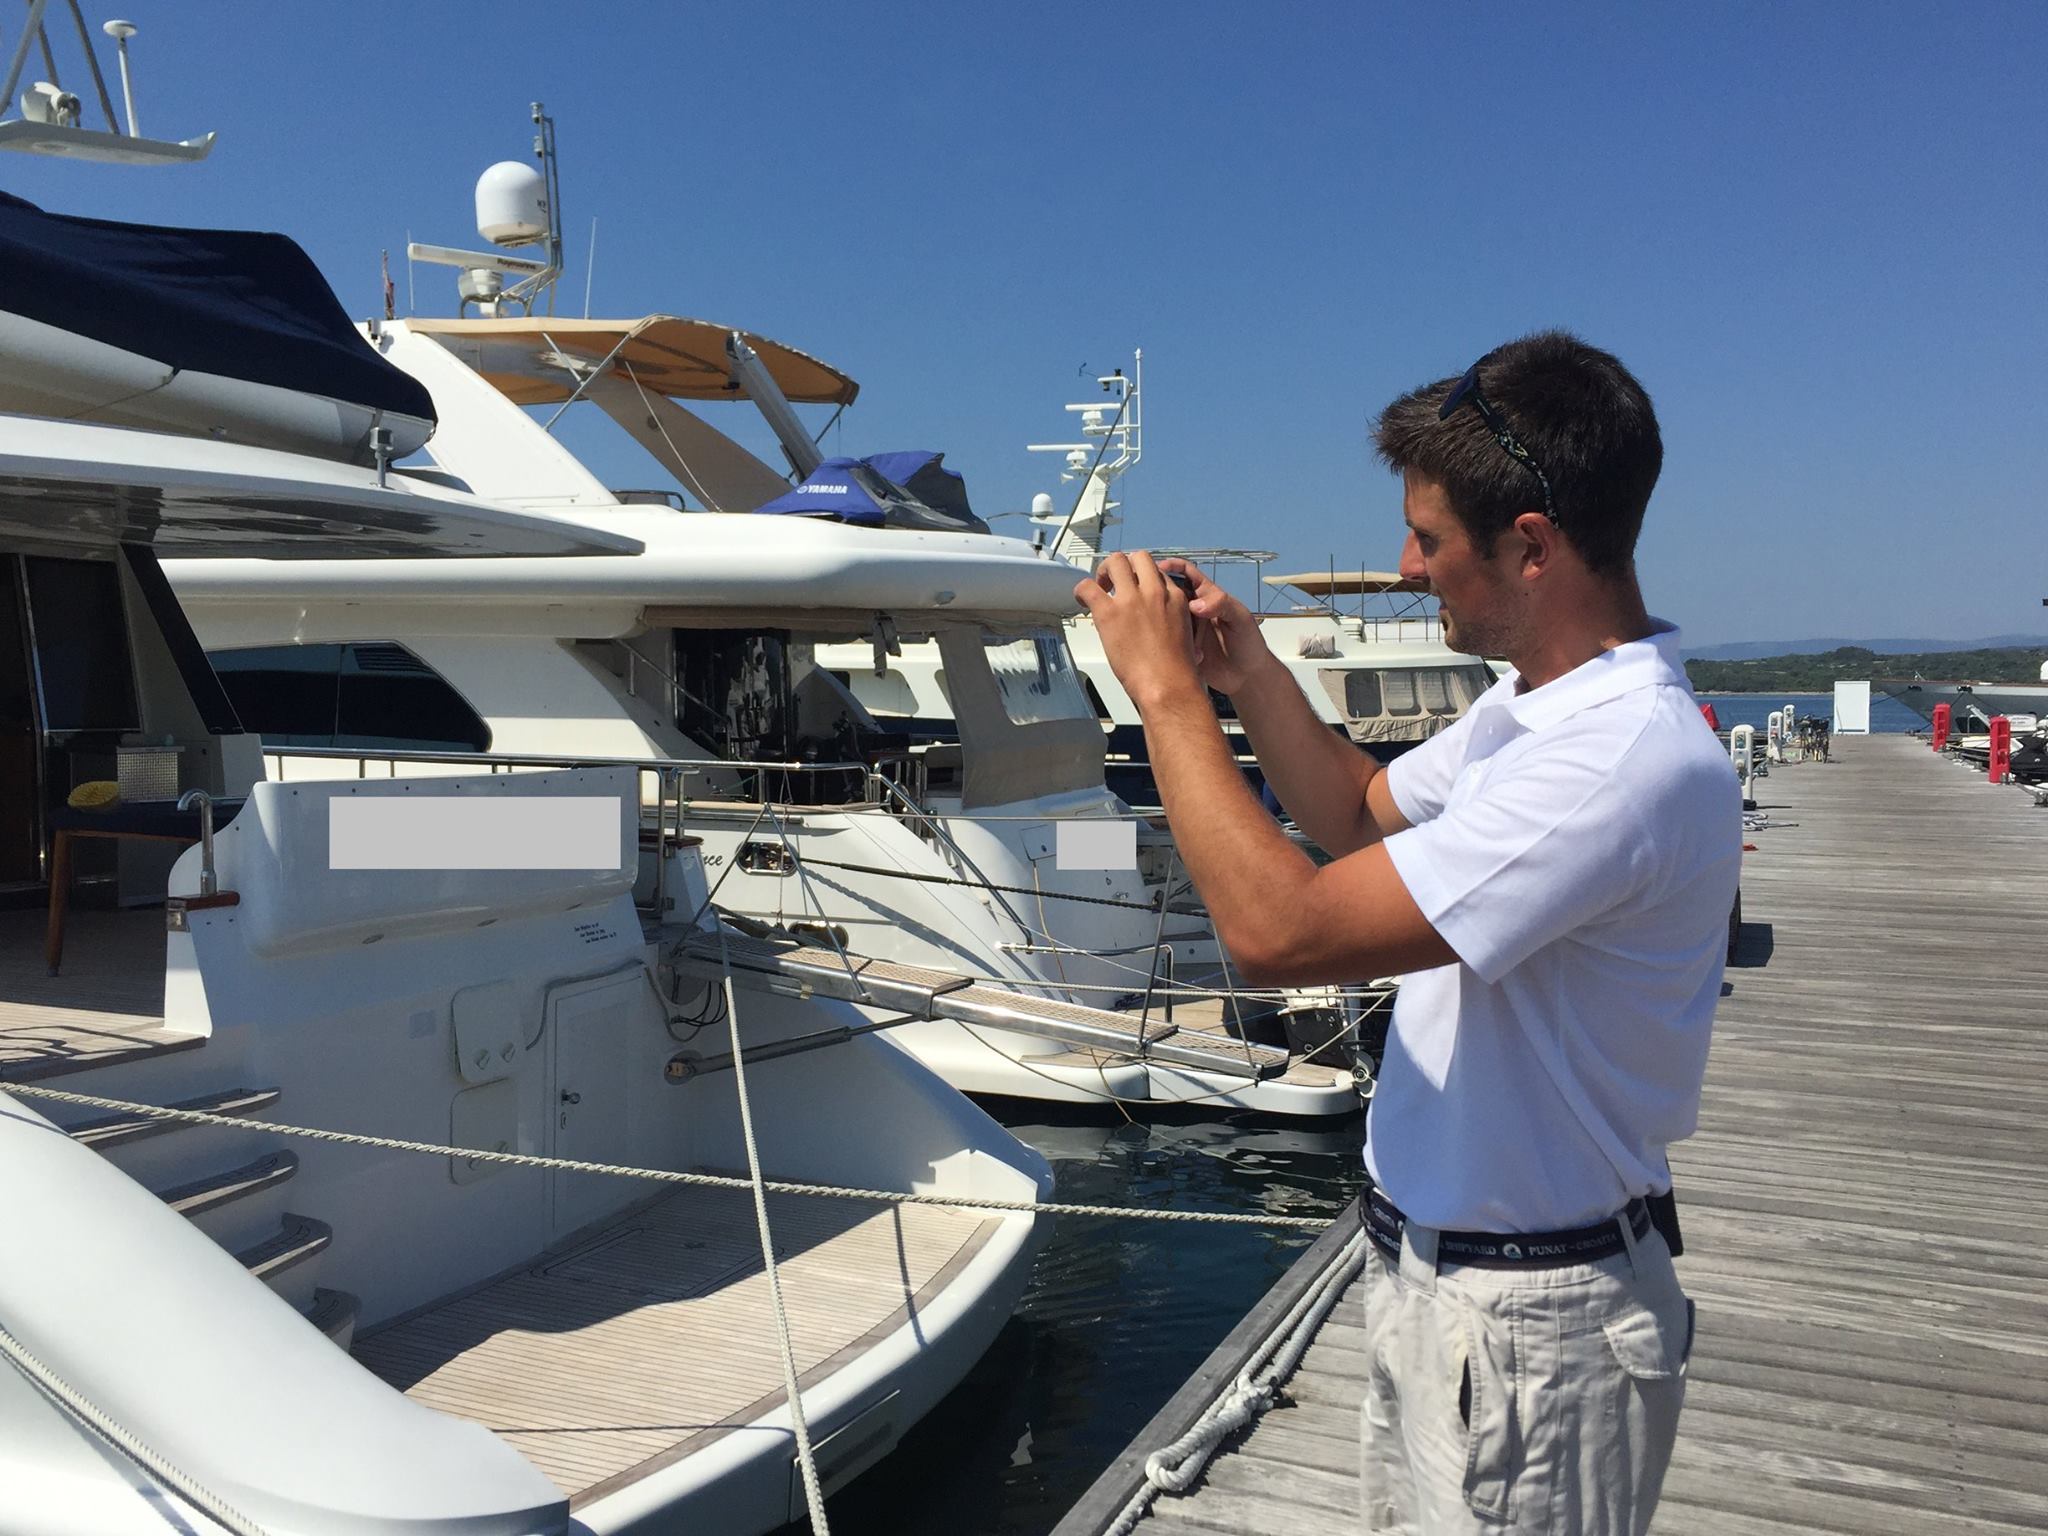 marina punat facebook marina staff on his duty, checking and taking photo of each boat in the marina with report.jpg